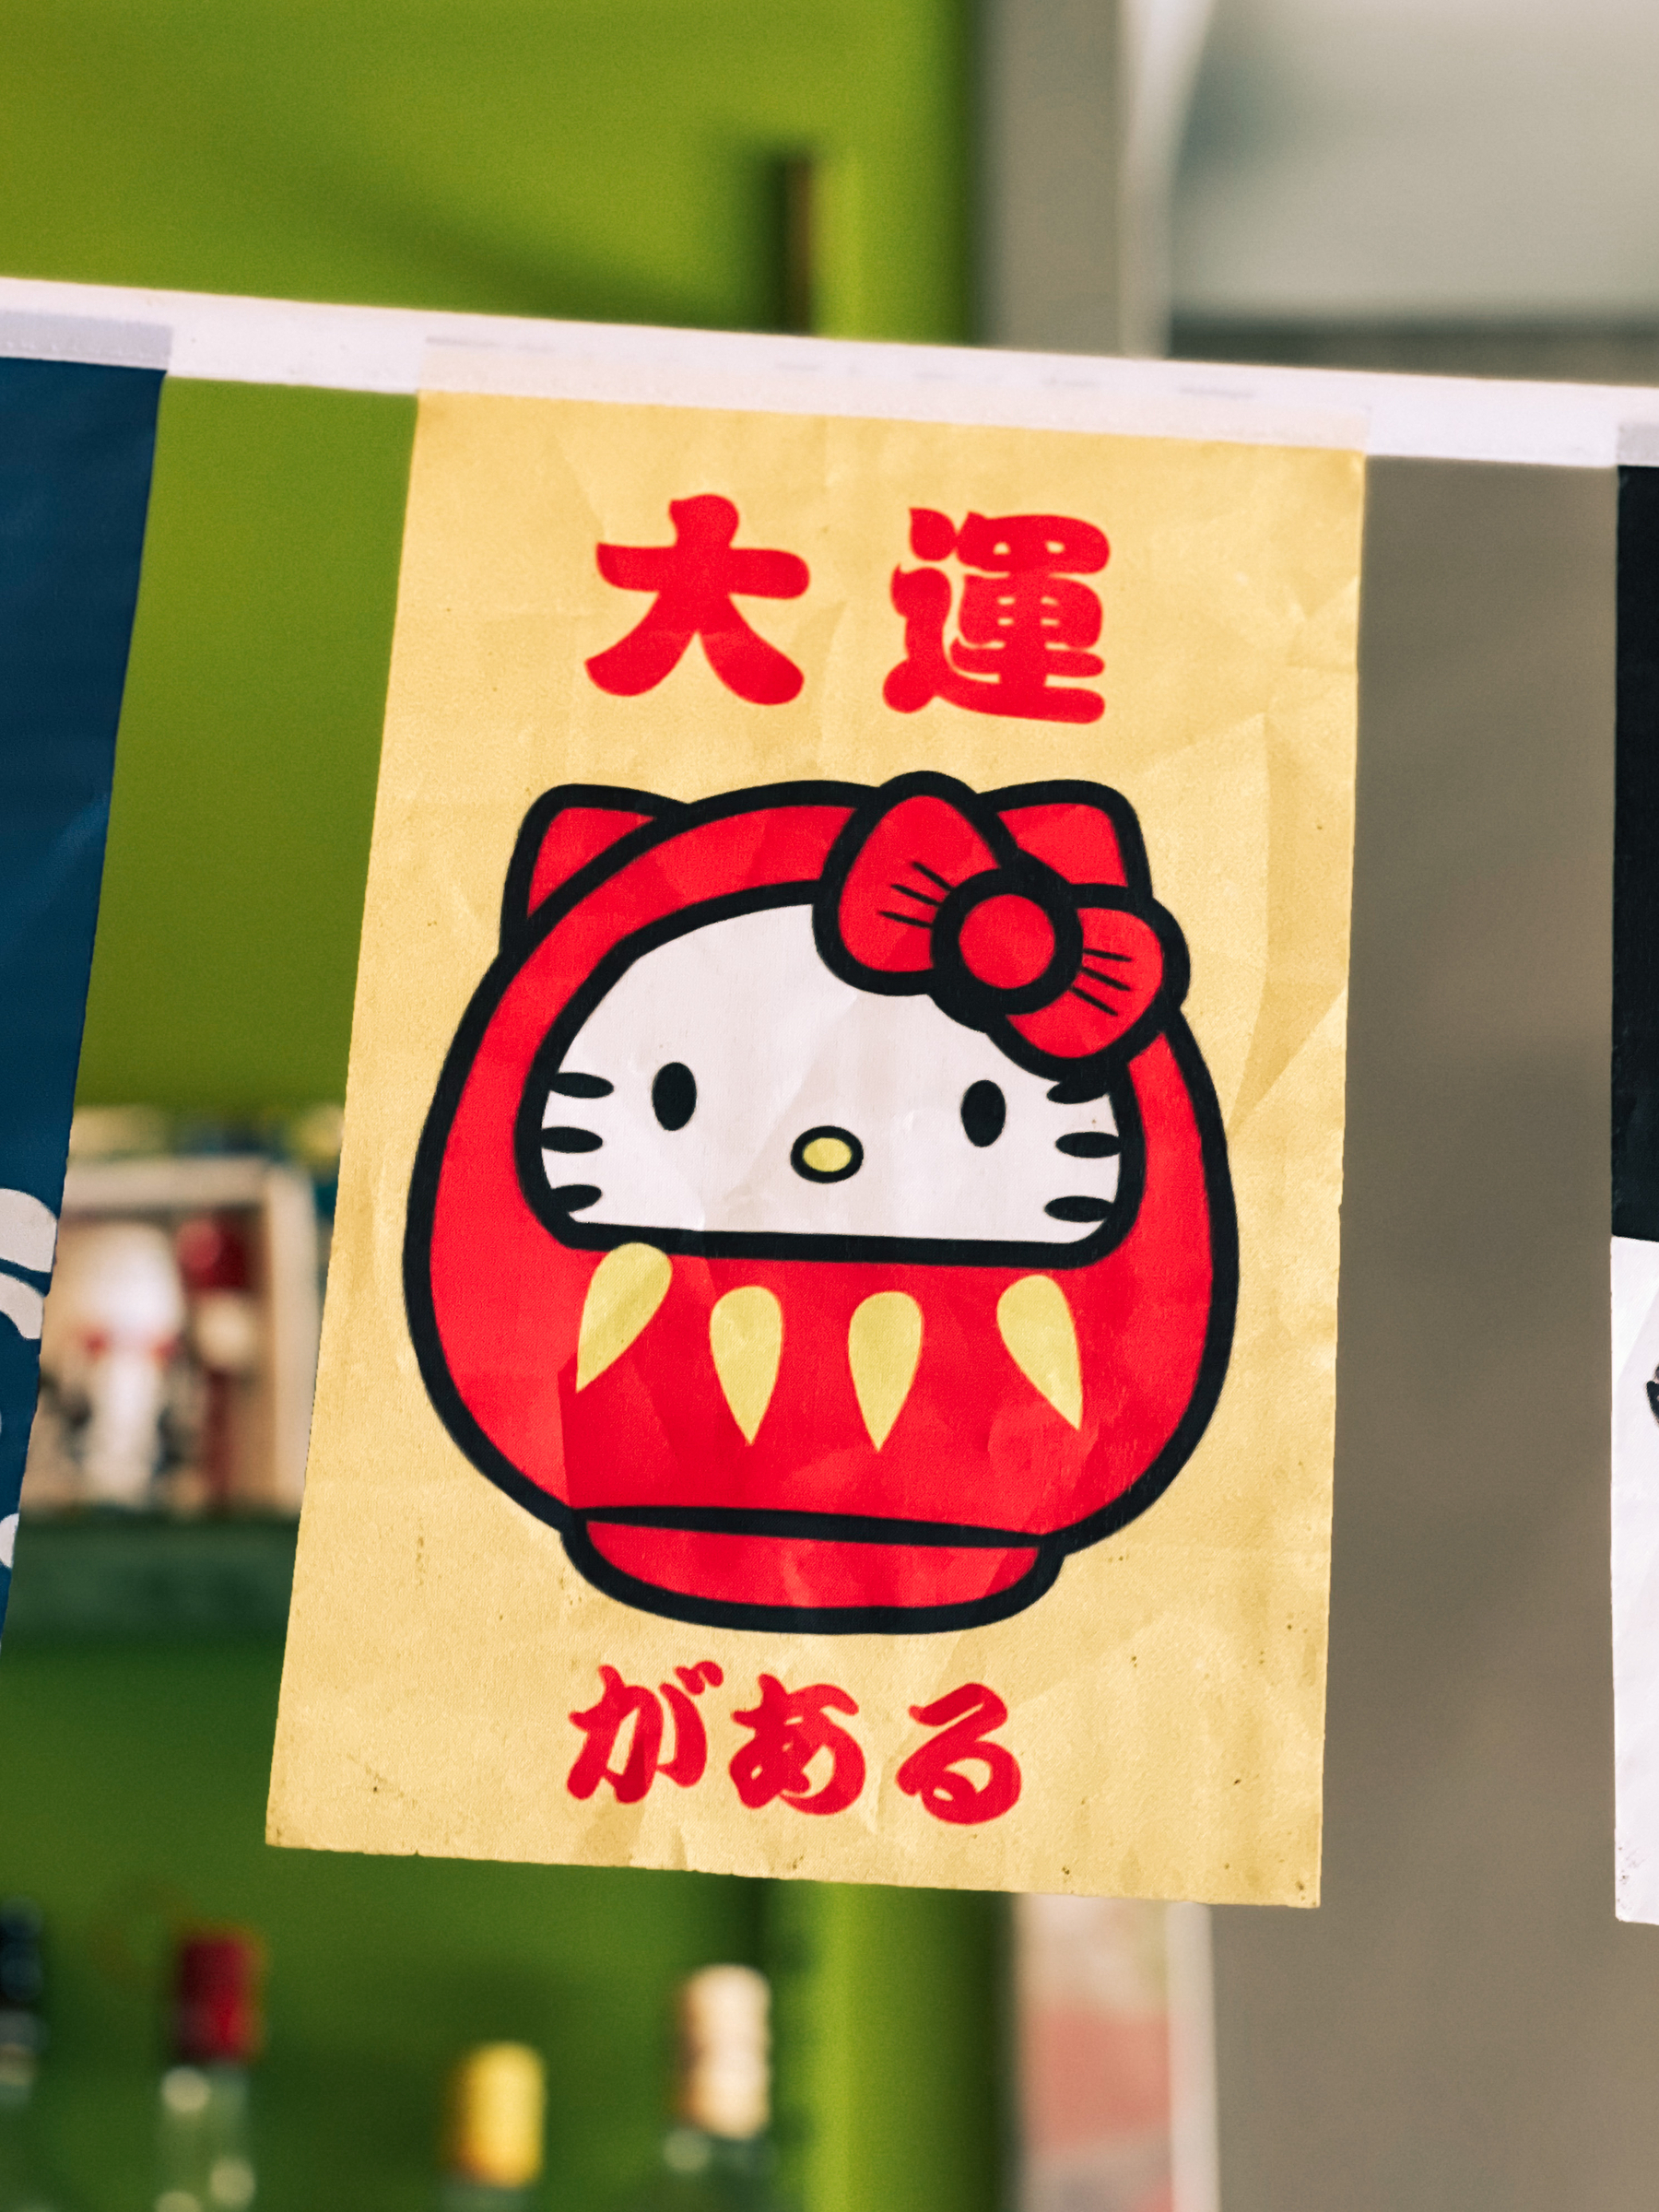 A Japanese restaurant banner, with Hello Kitty as a Daruma doll, and the words 大運.